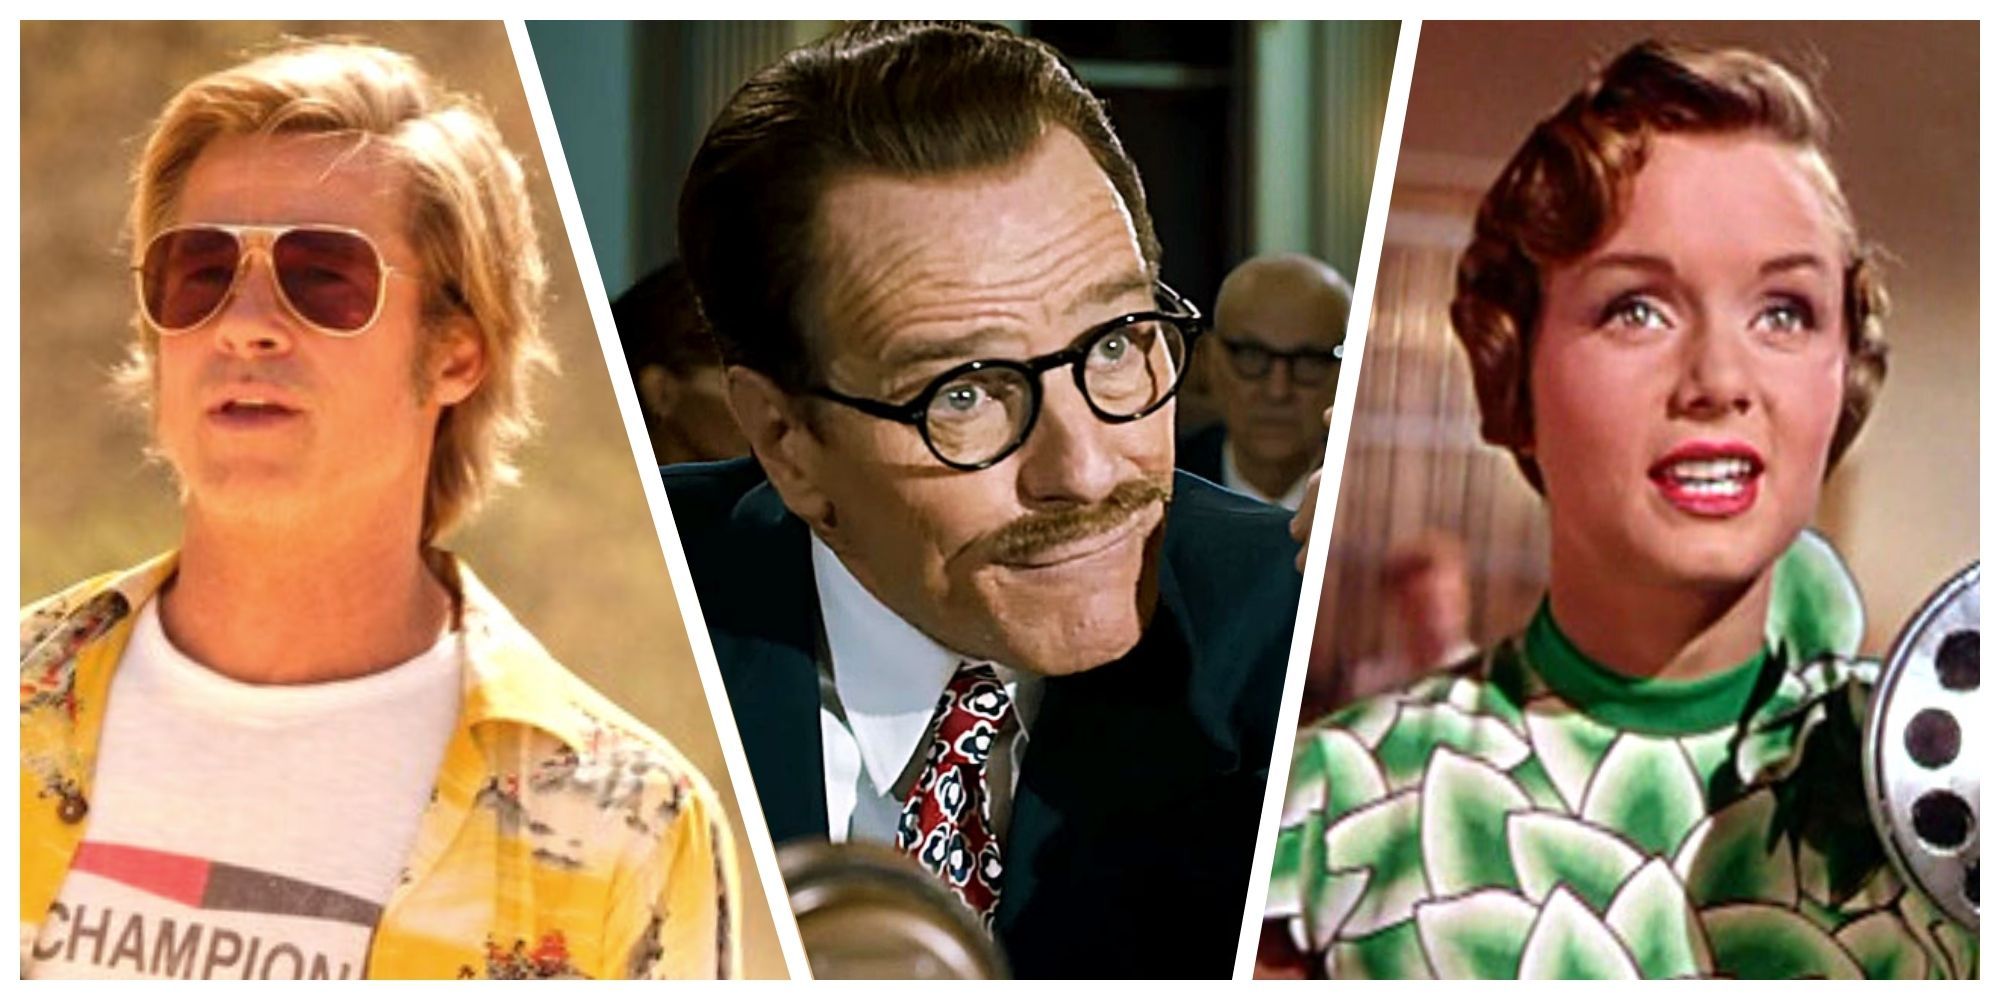 Brad Pitt in Once Upon a Time in Hollywood, Bryan Cranston in Trumbo, Debbie Reynolds in Singin' in the Rain